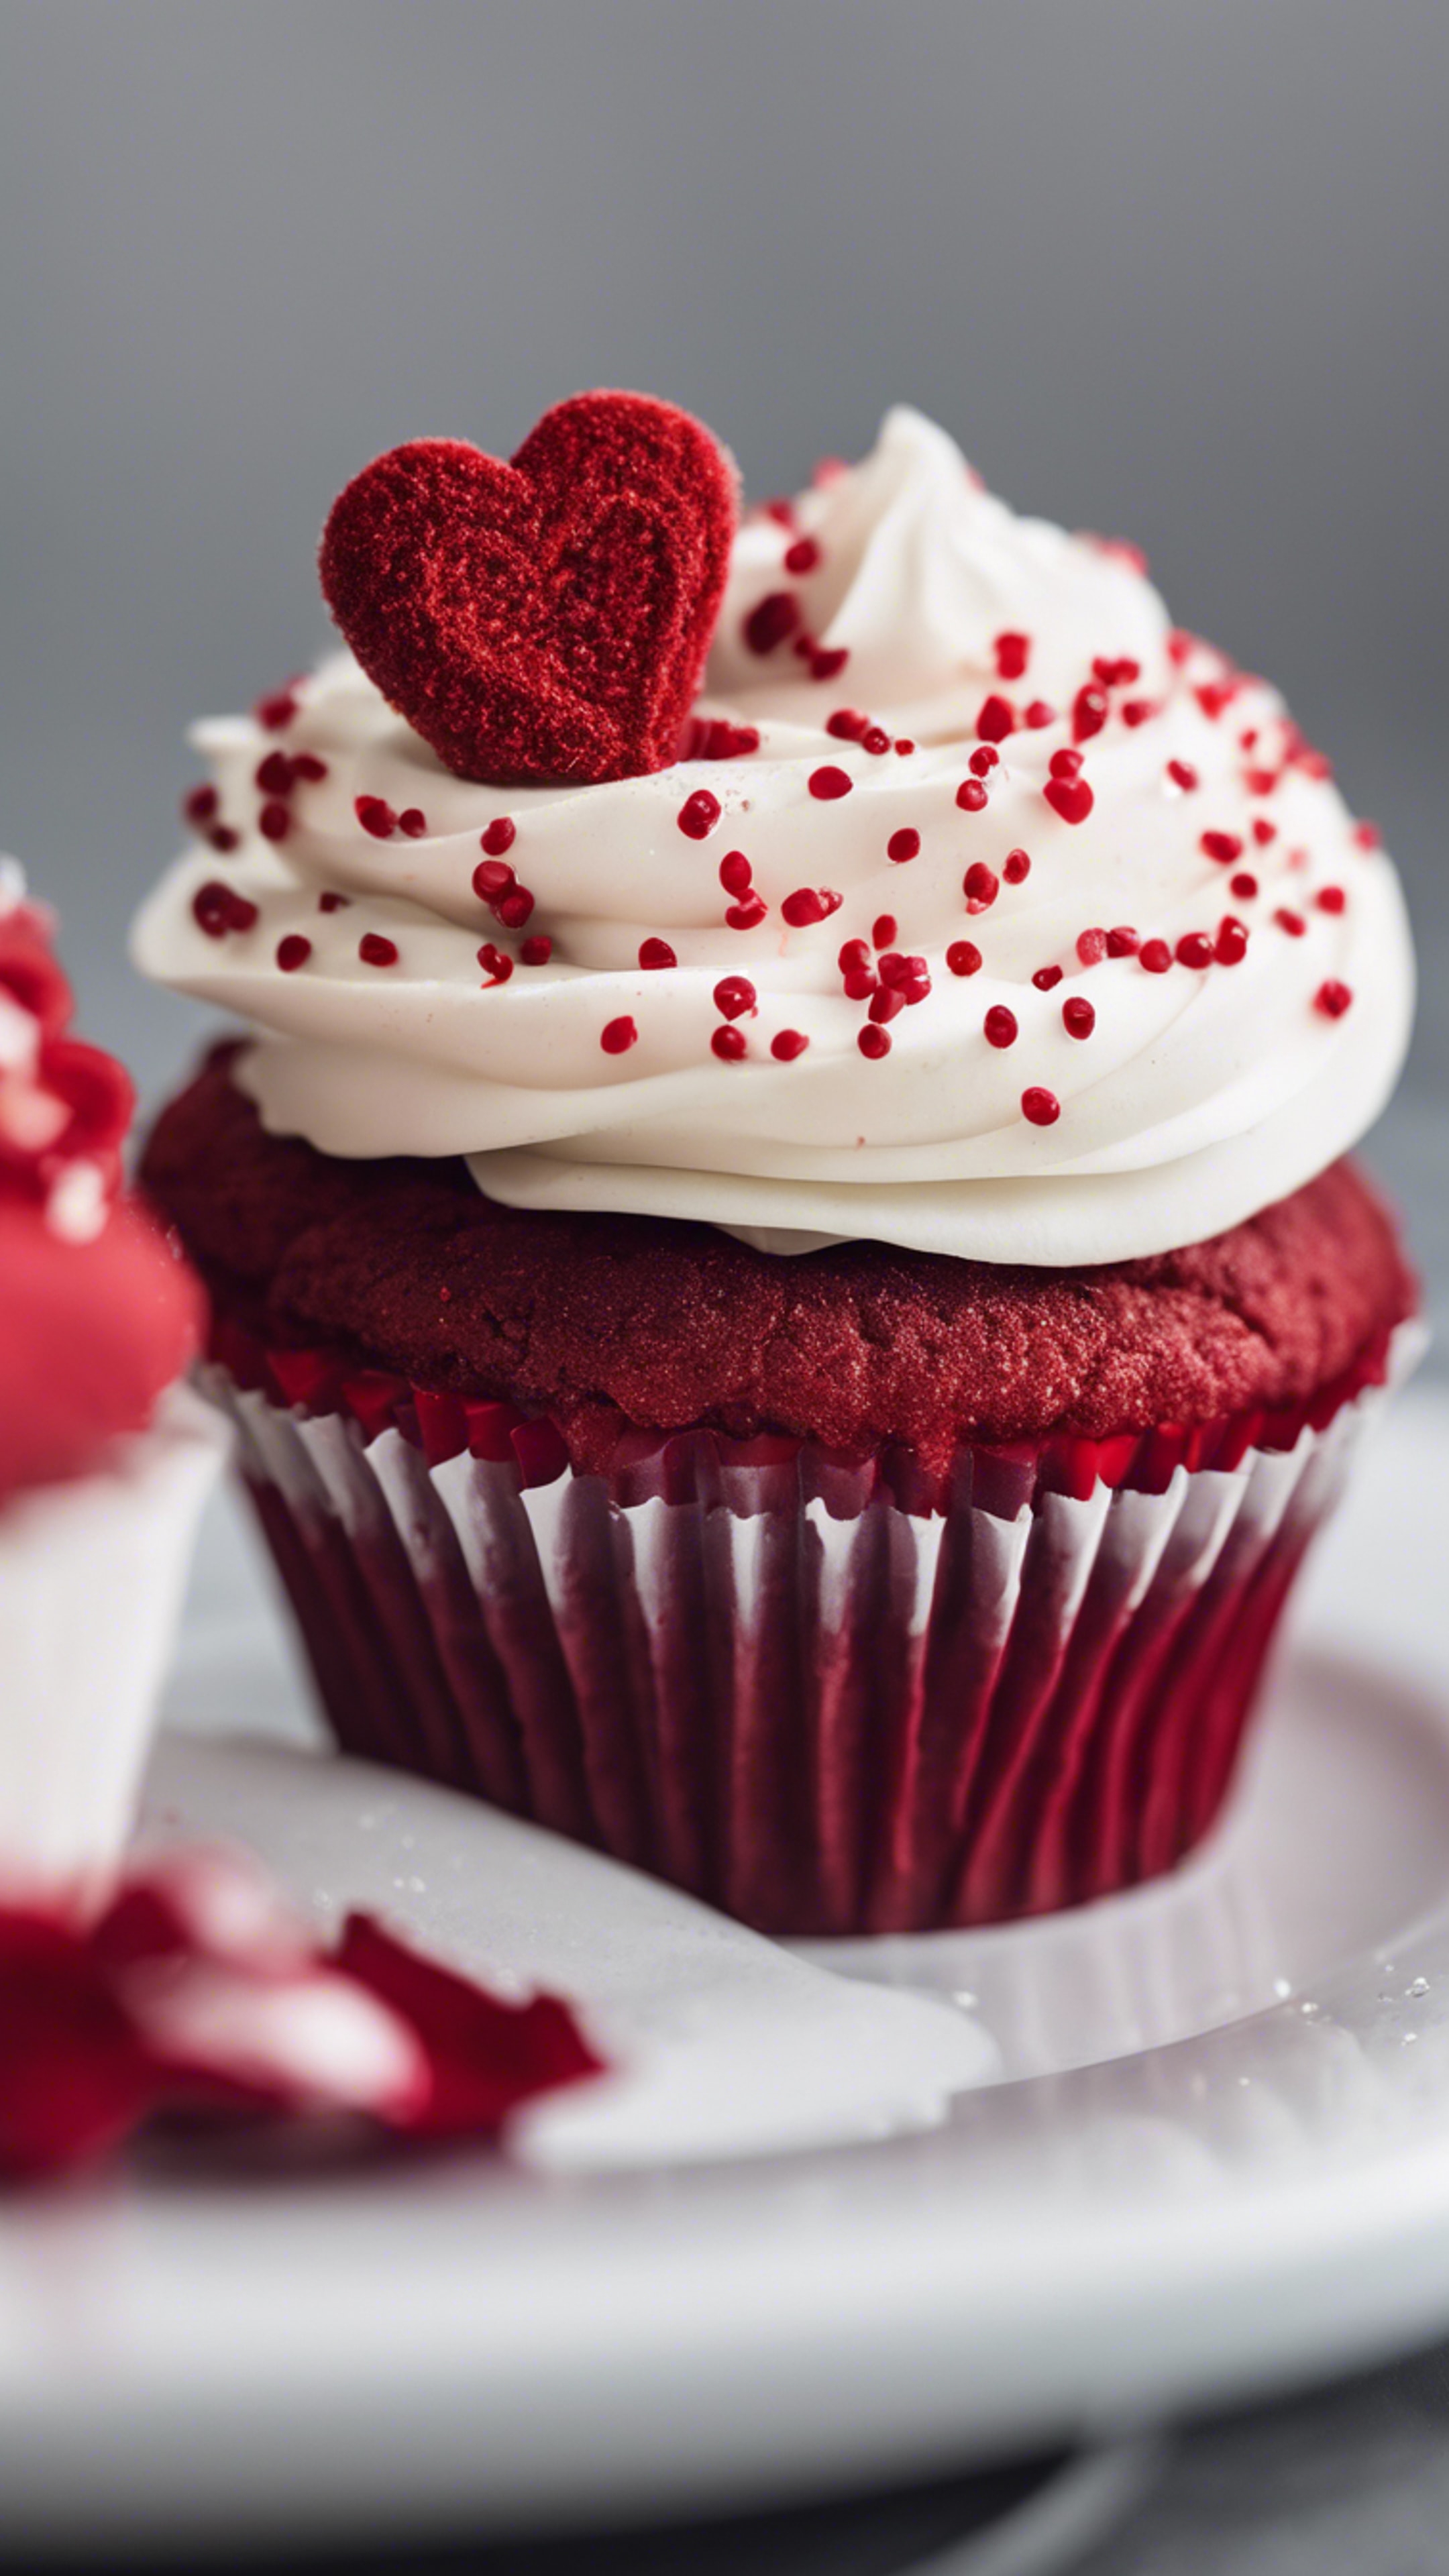 A red velvet cupcake with a heart-shaped sprinkle on top, presented on a white ceramic plate. Behang[2d98083c137b4c3e8f81]